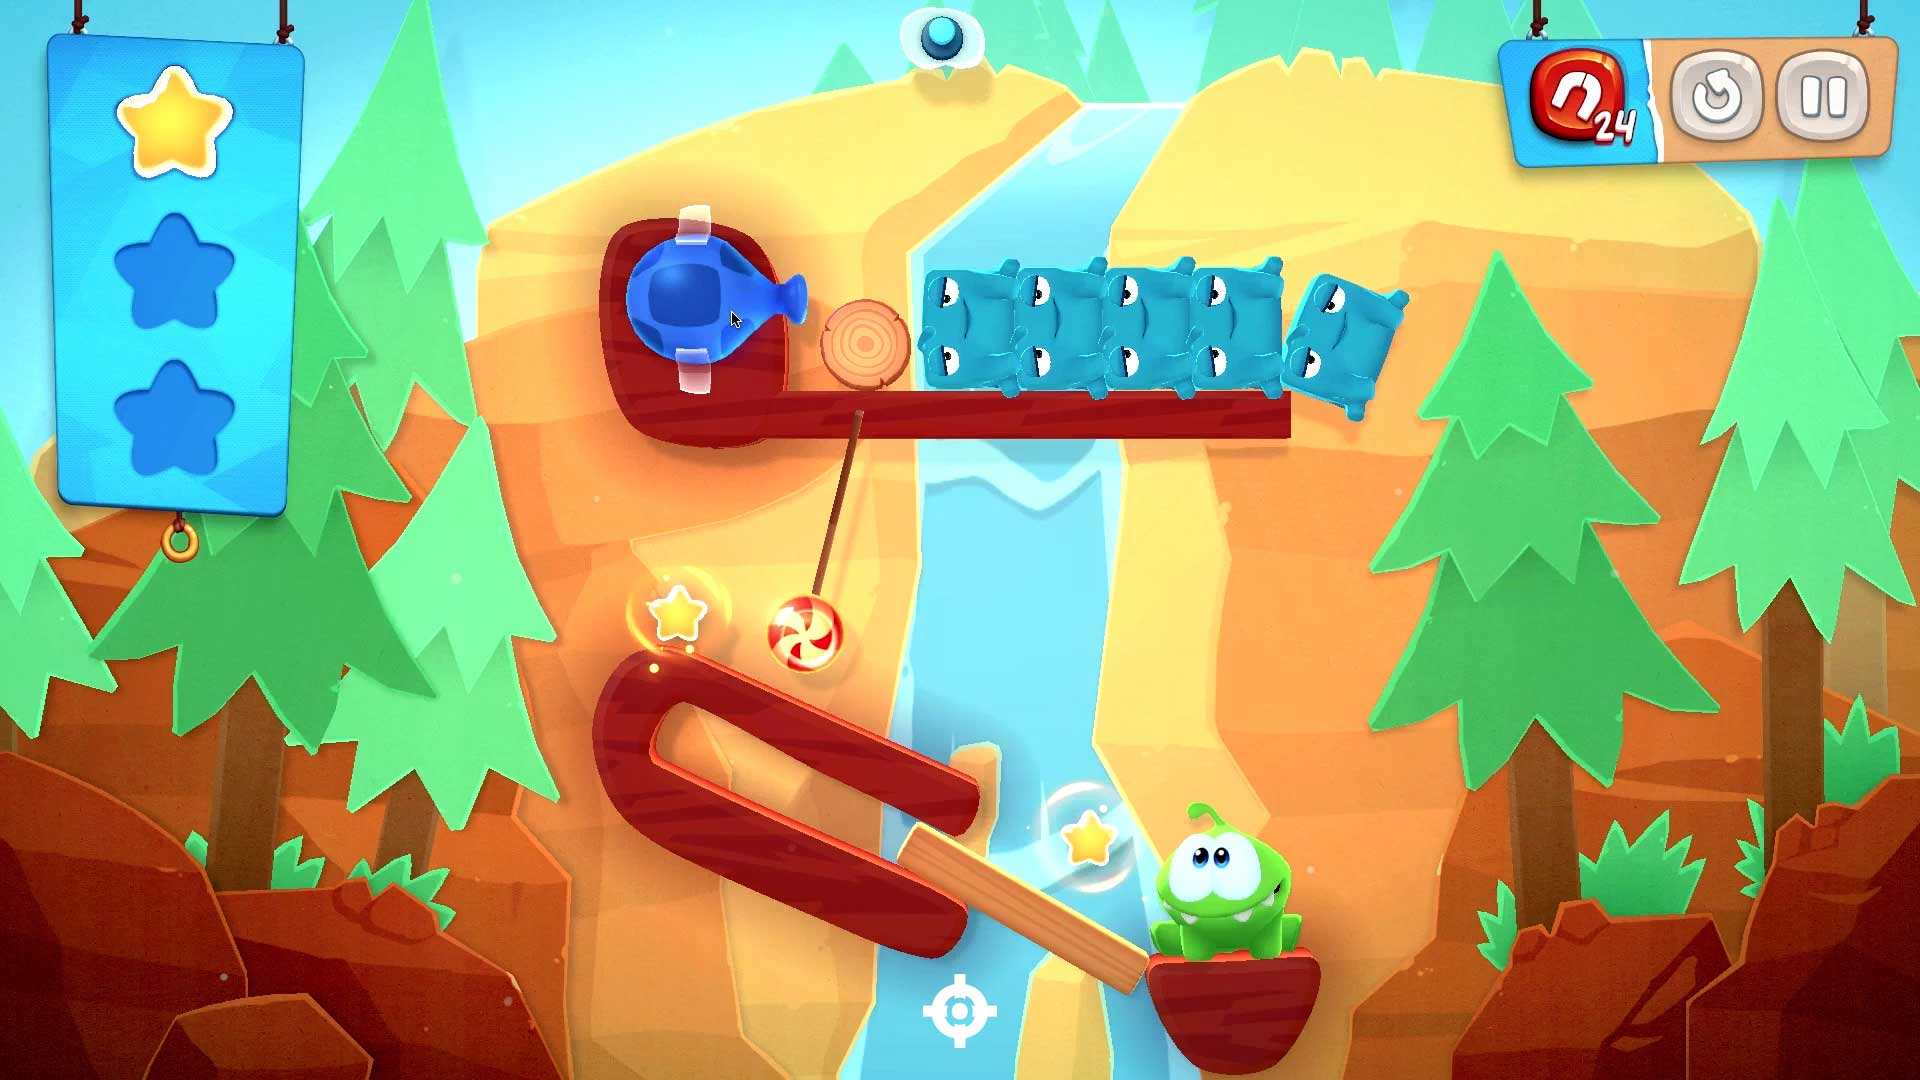 Cut The Rope Remastered · Recreo Gamer